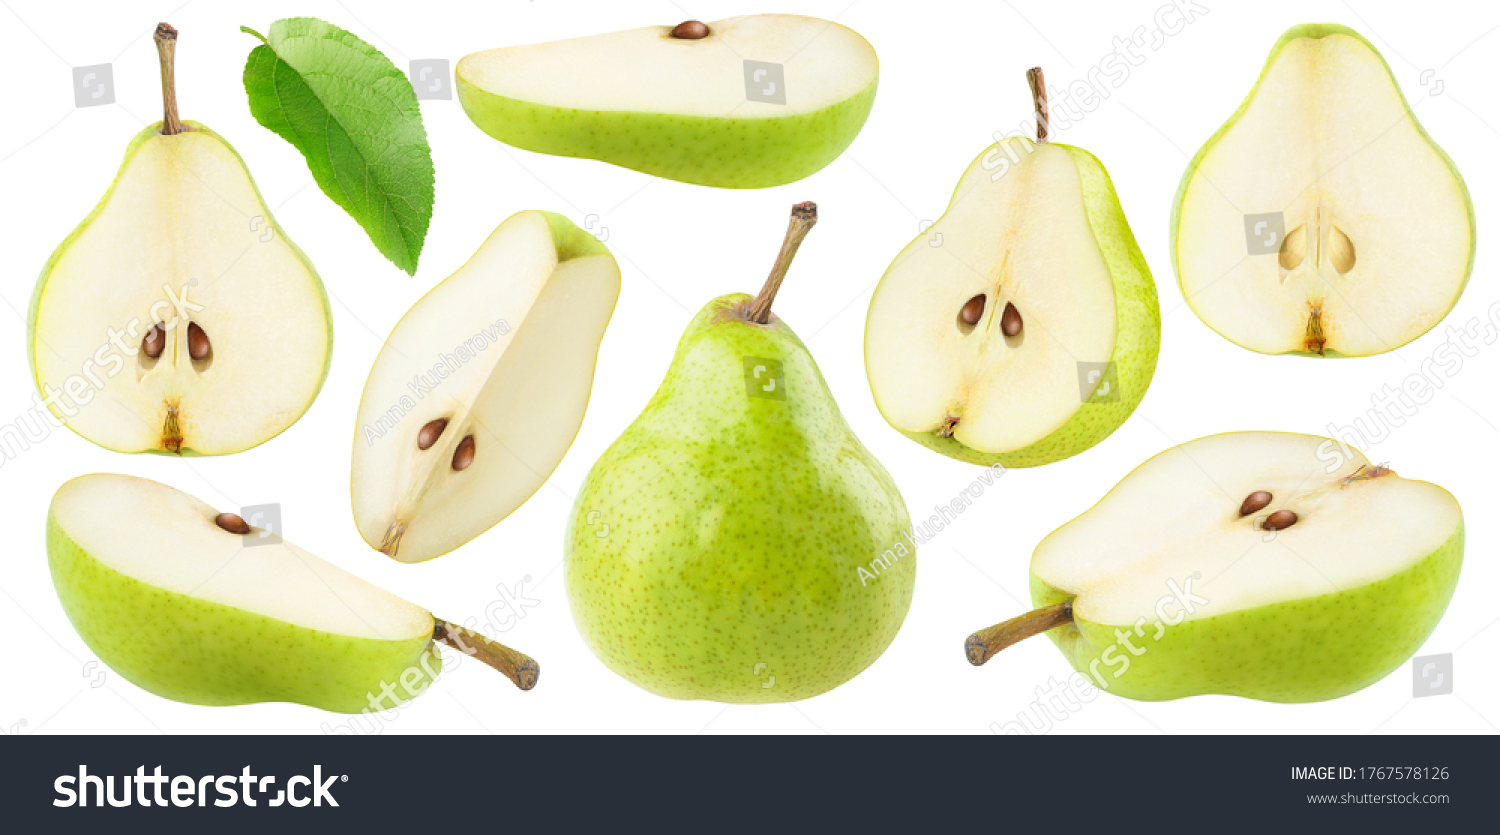 Isolated cut green pear fruits. Collection of green pear pieces of different shapes isolated on white background #1767578126